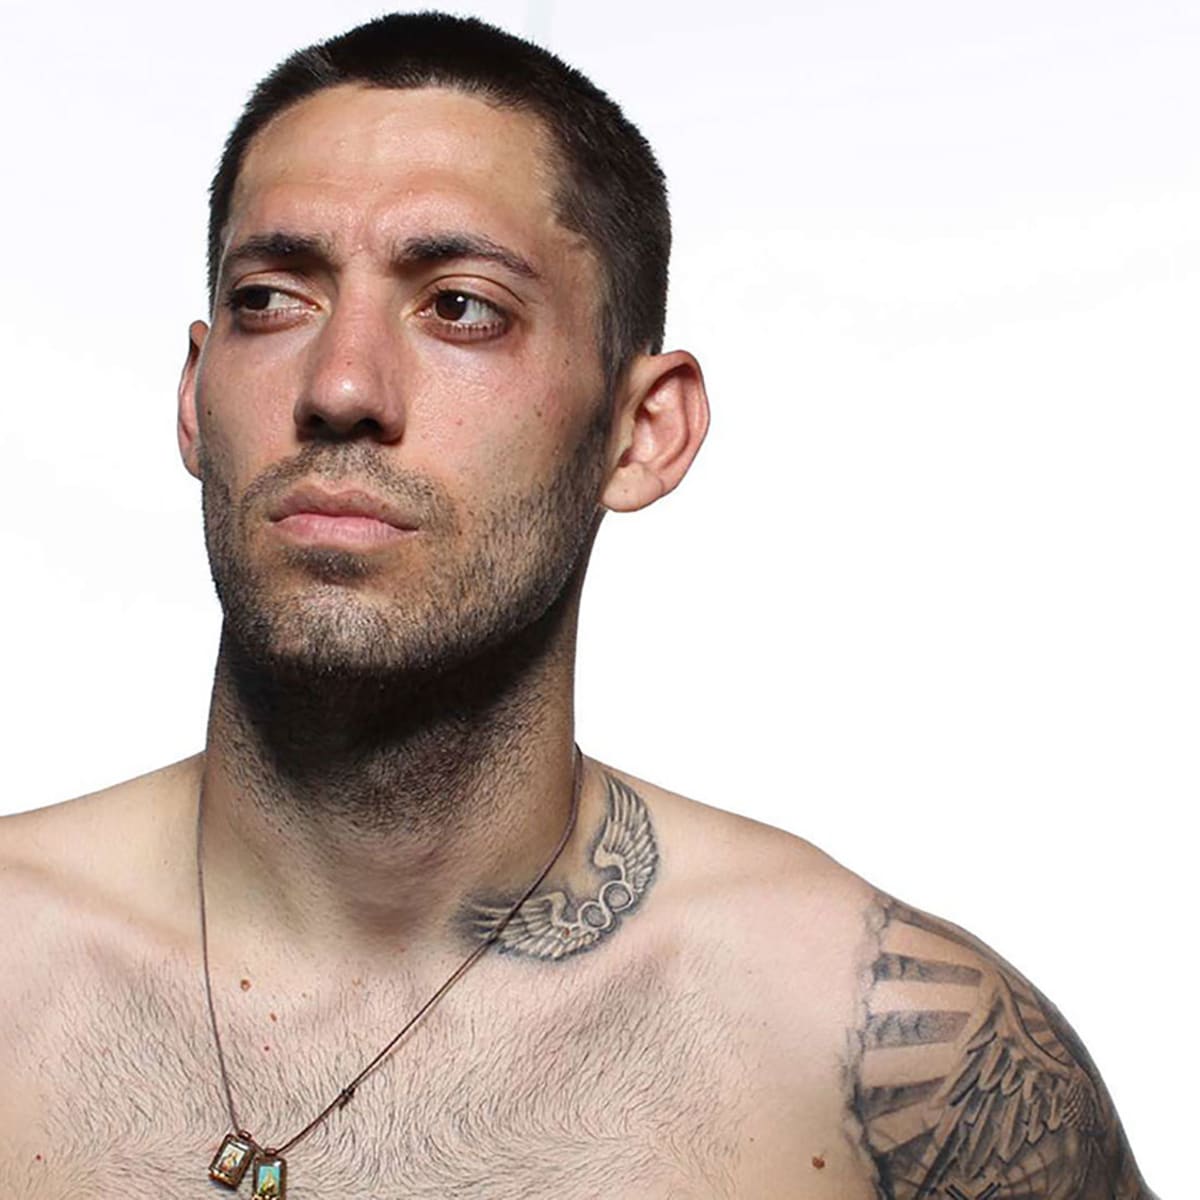 Throwback Thursday: Clint Dempsey helps the U.S. howl England into